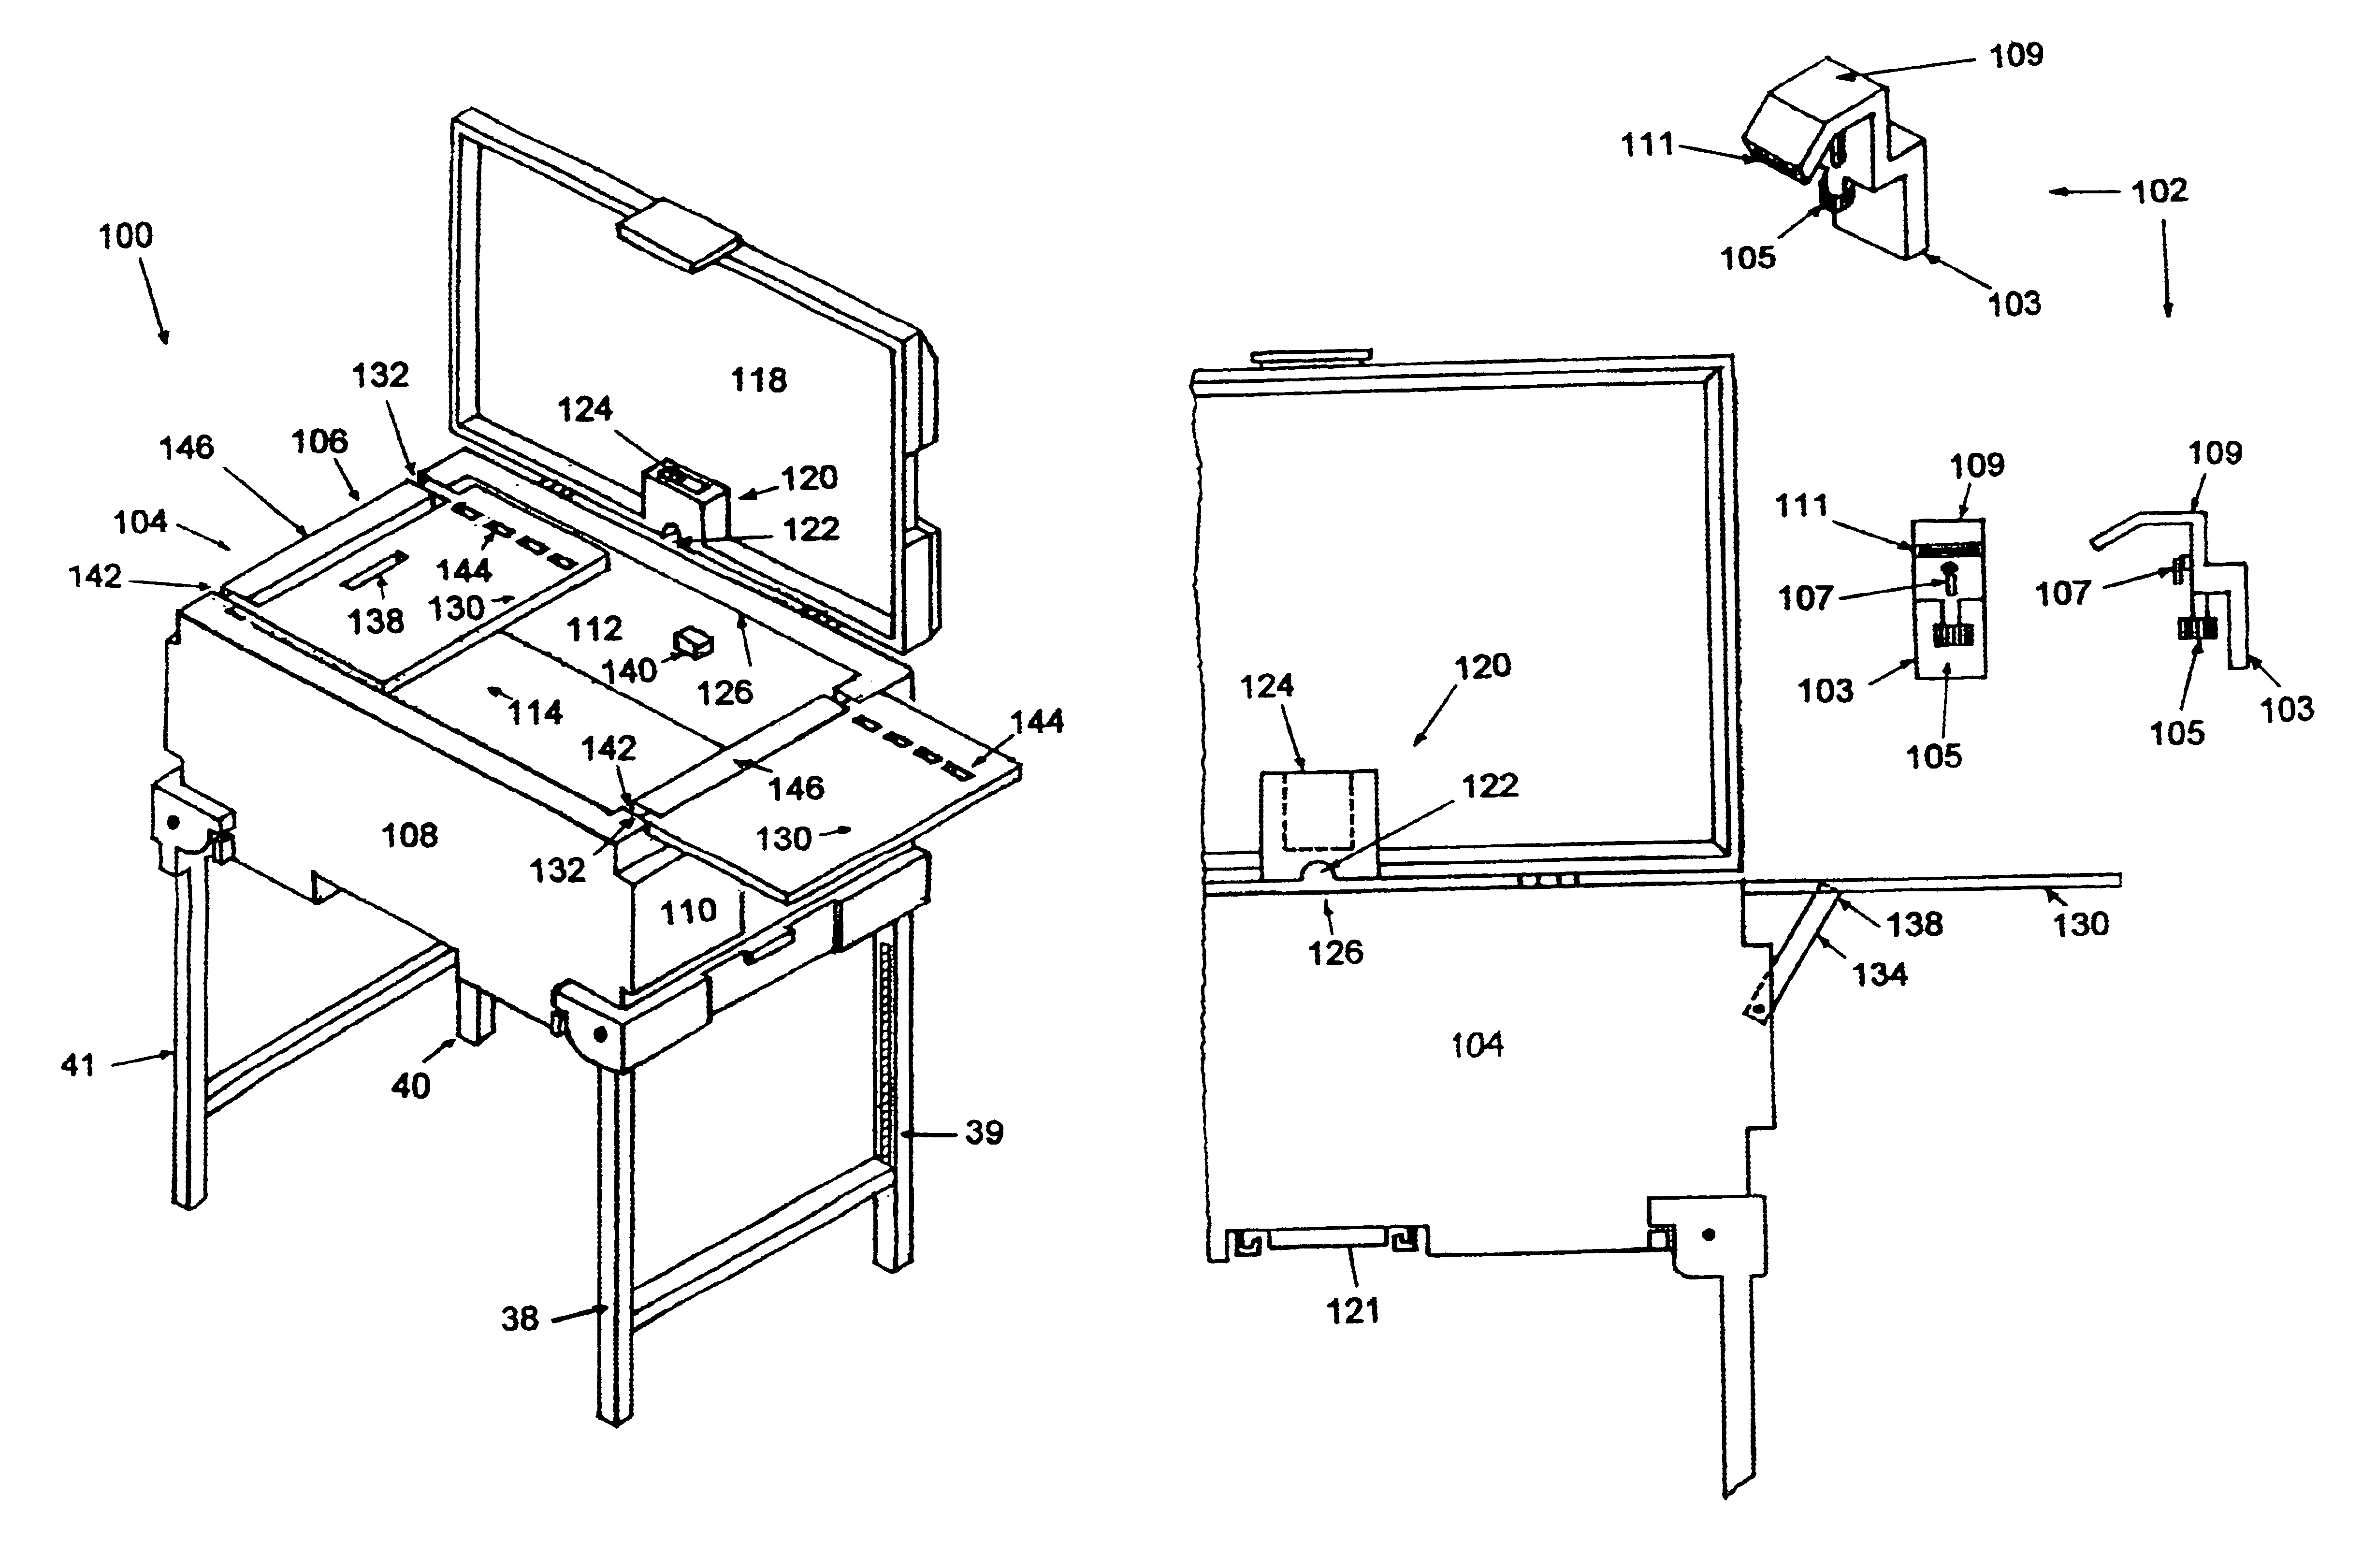 Combination game cleaning station, portable sink and ice chest